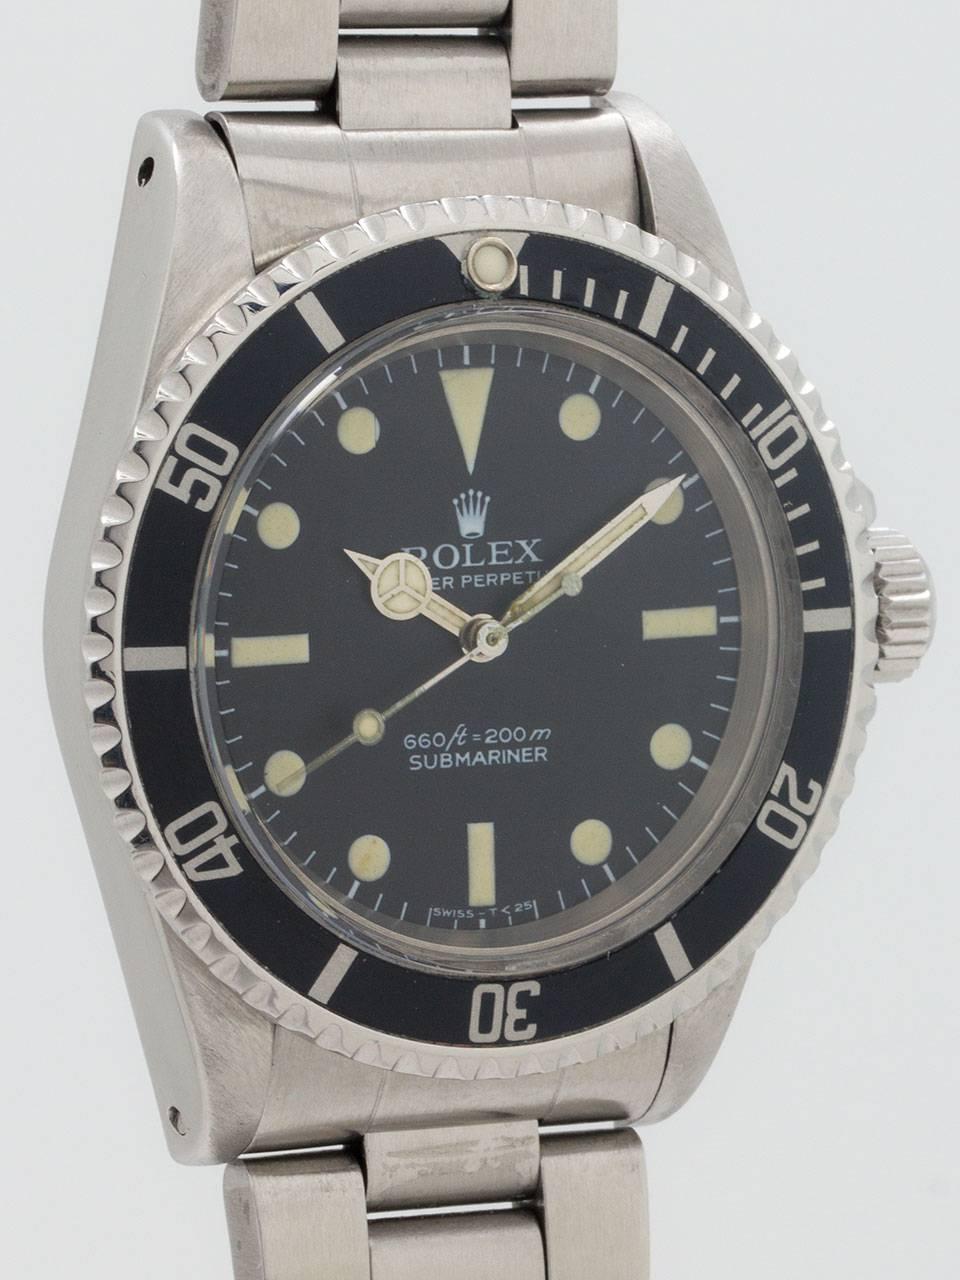 Rolex Stainless Steel Submariner ref 5513 serial no. 5.1 million circa 1977. Featuring 40mm diameter case with bidirectional elapsed time bezel, older fat font insert, and low dome acrylic crystal. With very pleasing original matte black dial with